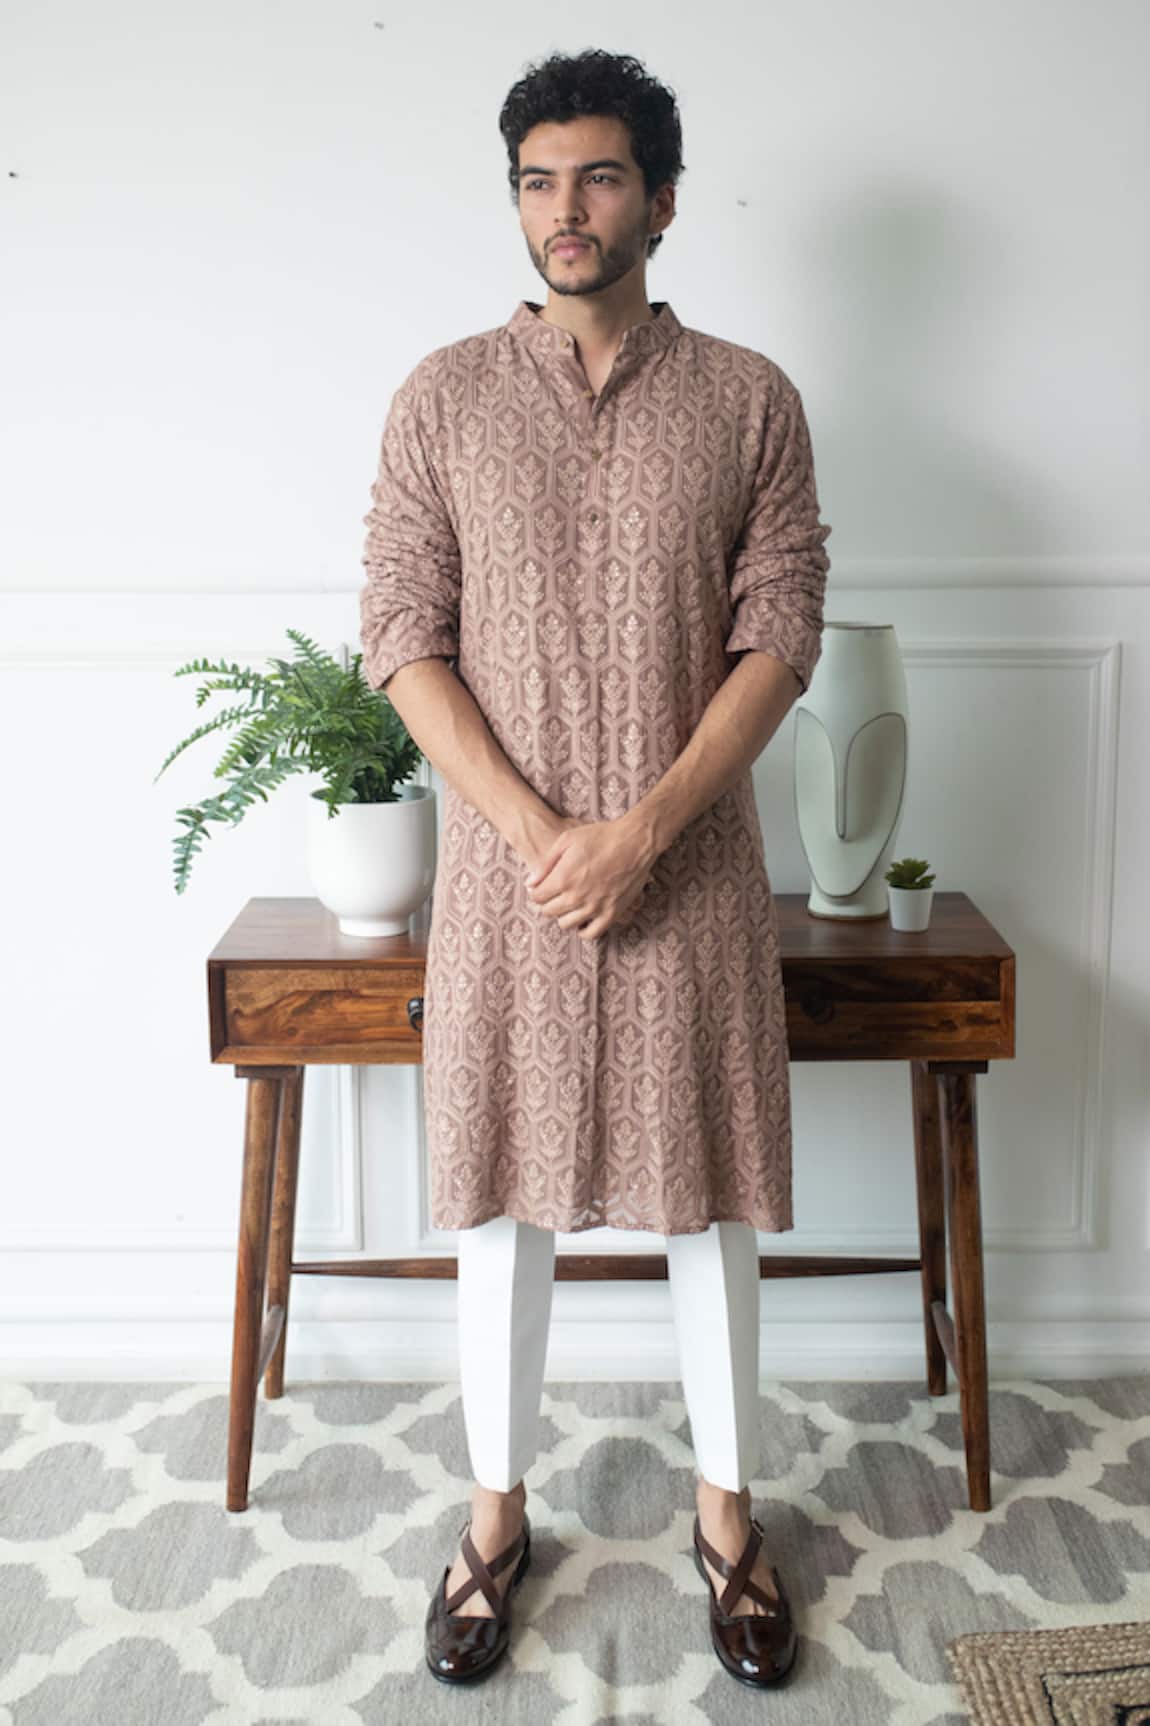 Buy Men's Short Kurtas Online in Pure Cotton and Linen | Shop Casual Kurtas  for in India